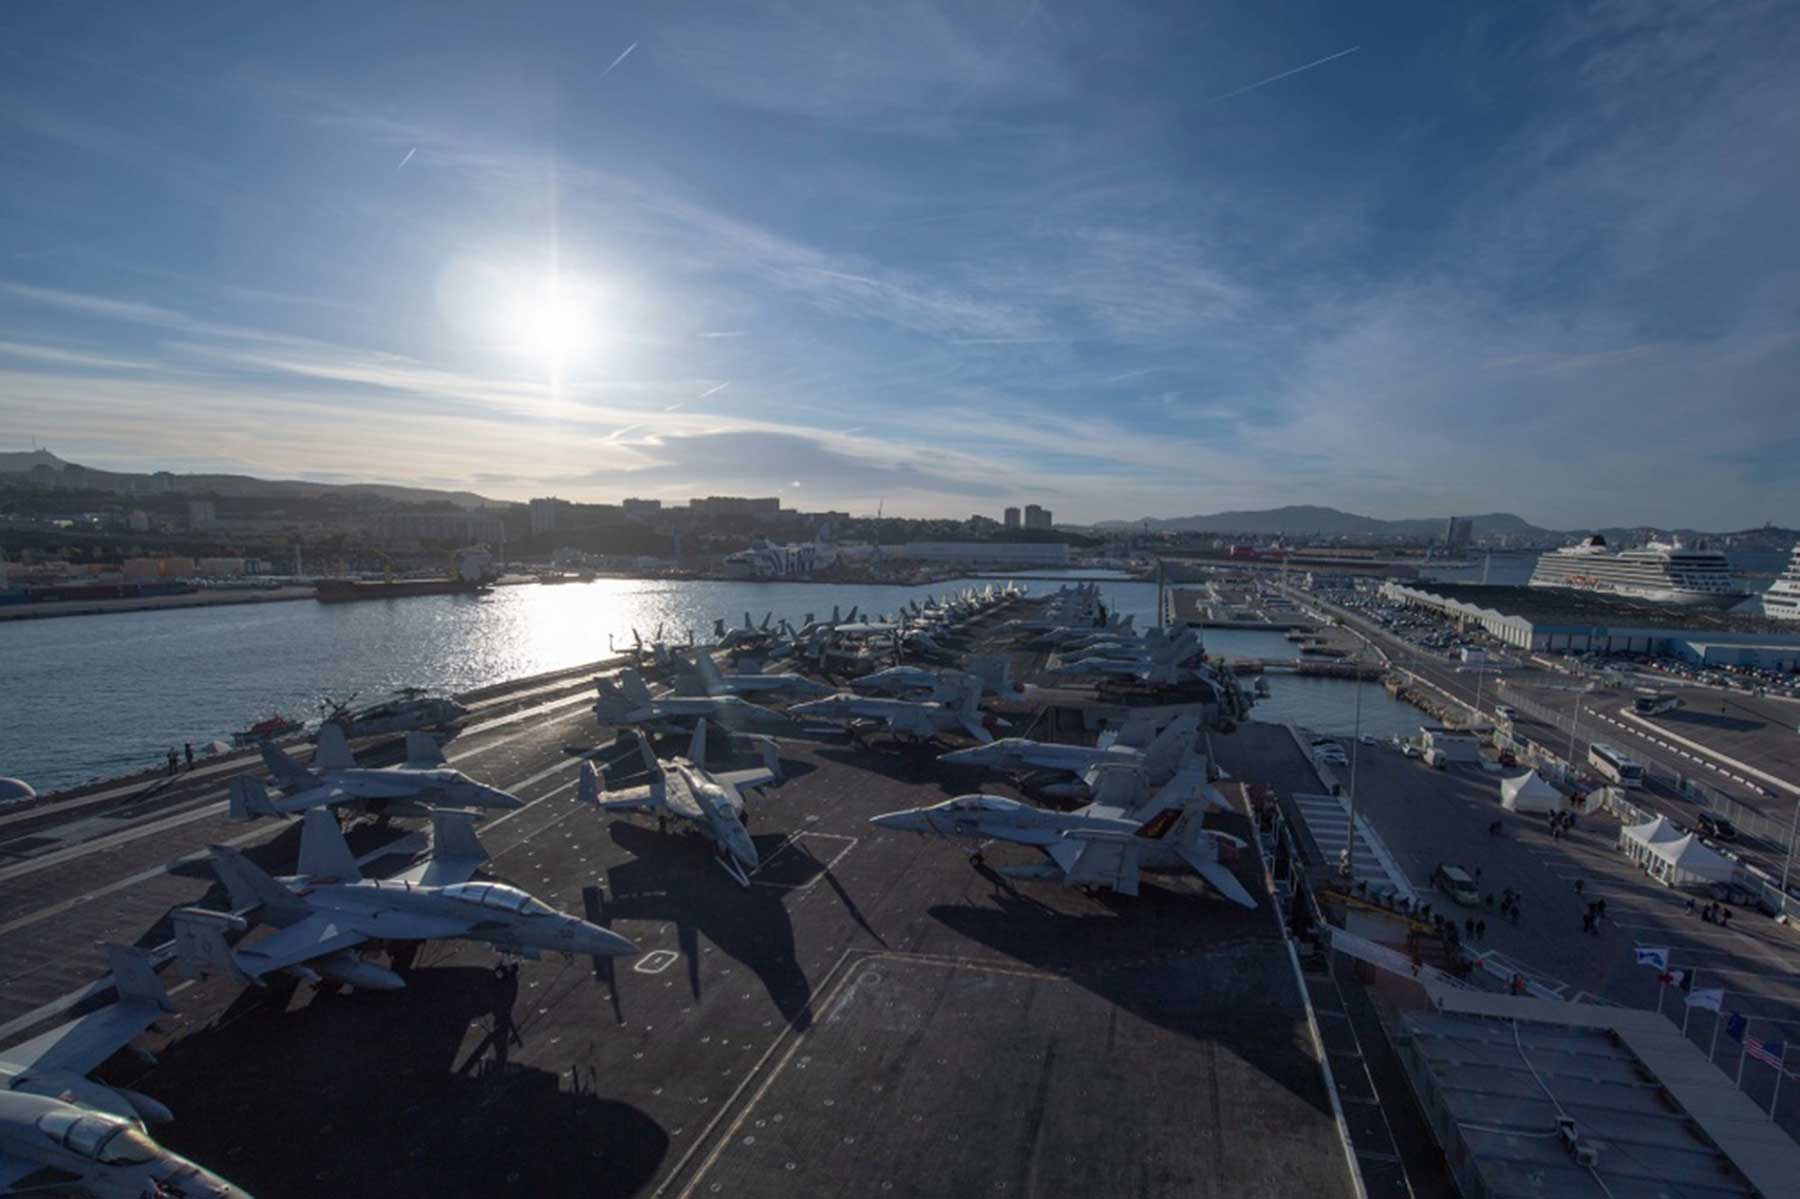 The aircraft carrier USS John C. Stennis (CVN 74) is in port Marseille, France, April 27, 2019. The John C. Stennis Carrier Strike Group (JCSCSG) is deployed in support of maritime security cooperation efforts in the U.S. 6th Fleet area of responsibility -- U.S. Navy photo by MCS 3rd Class Grant G. Grady. -